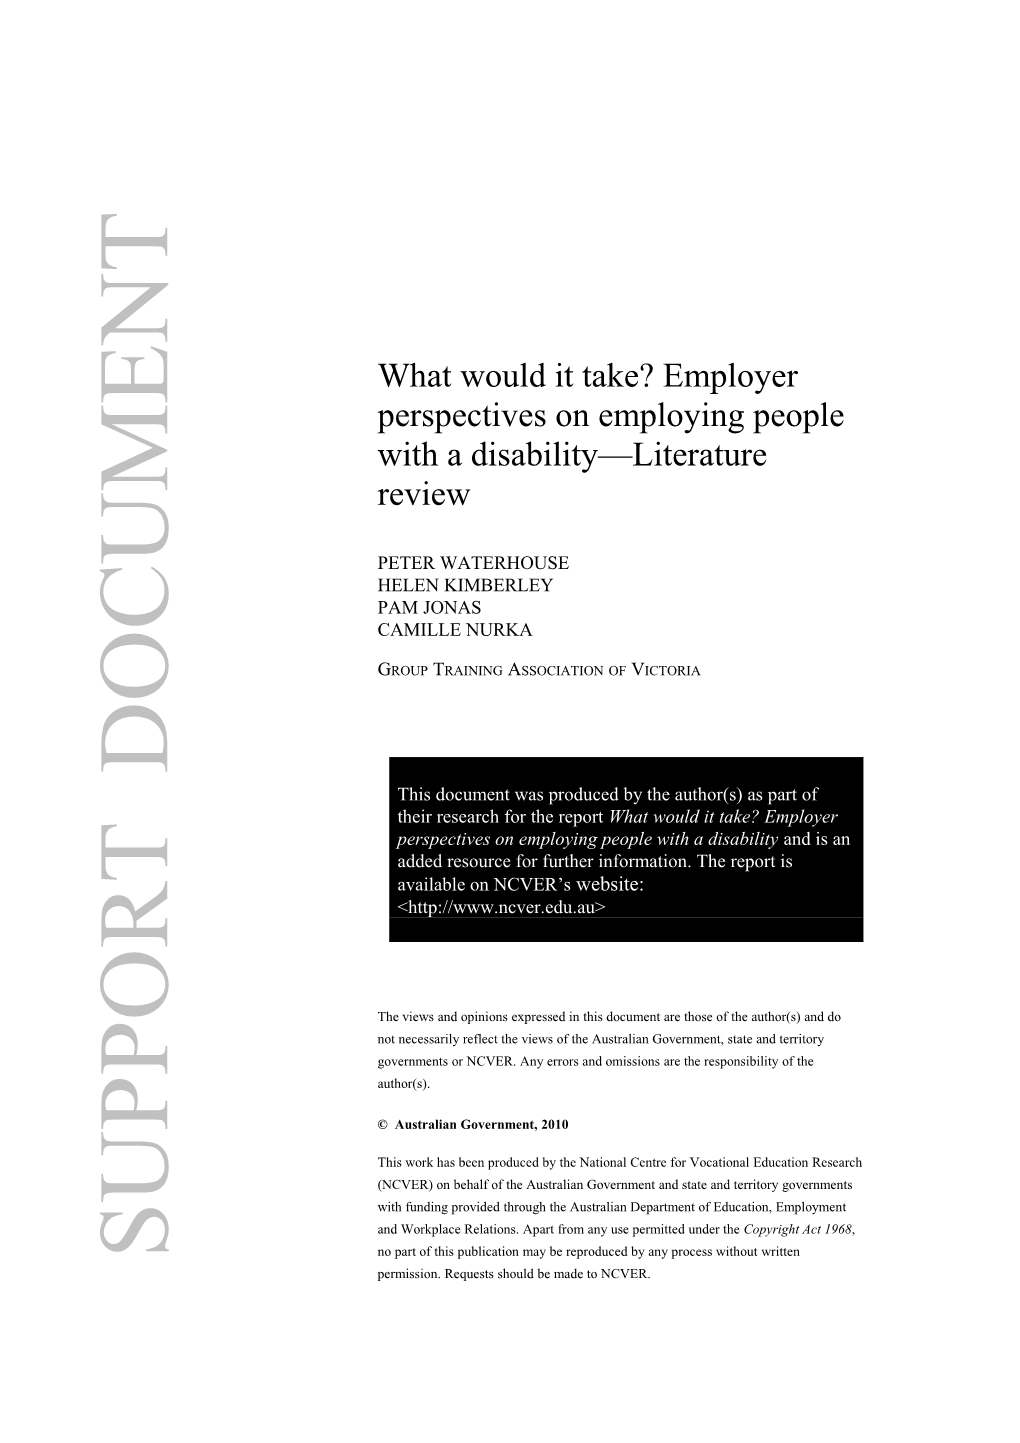 What Would It Take? Employer Perspectives on Employing People with a Disability Literature